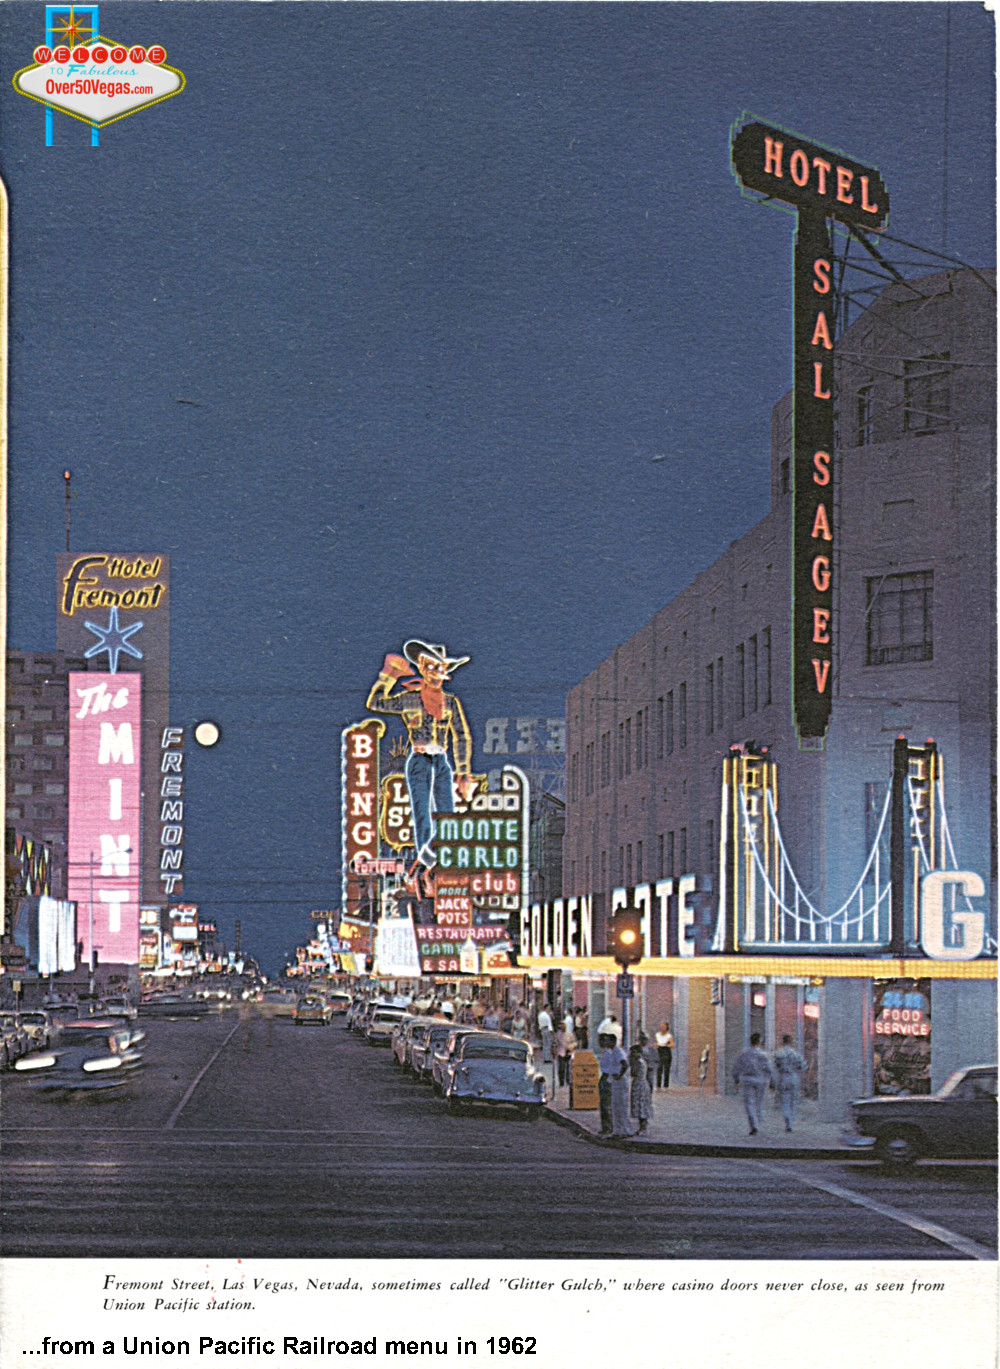 Union Pacific Railroad menu showing Fremont street in 1962